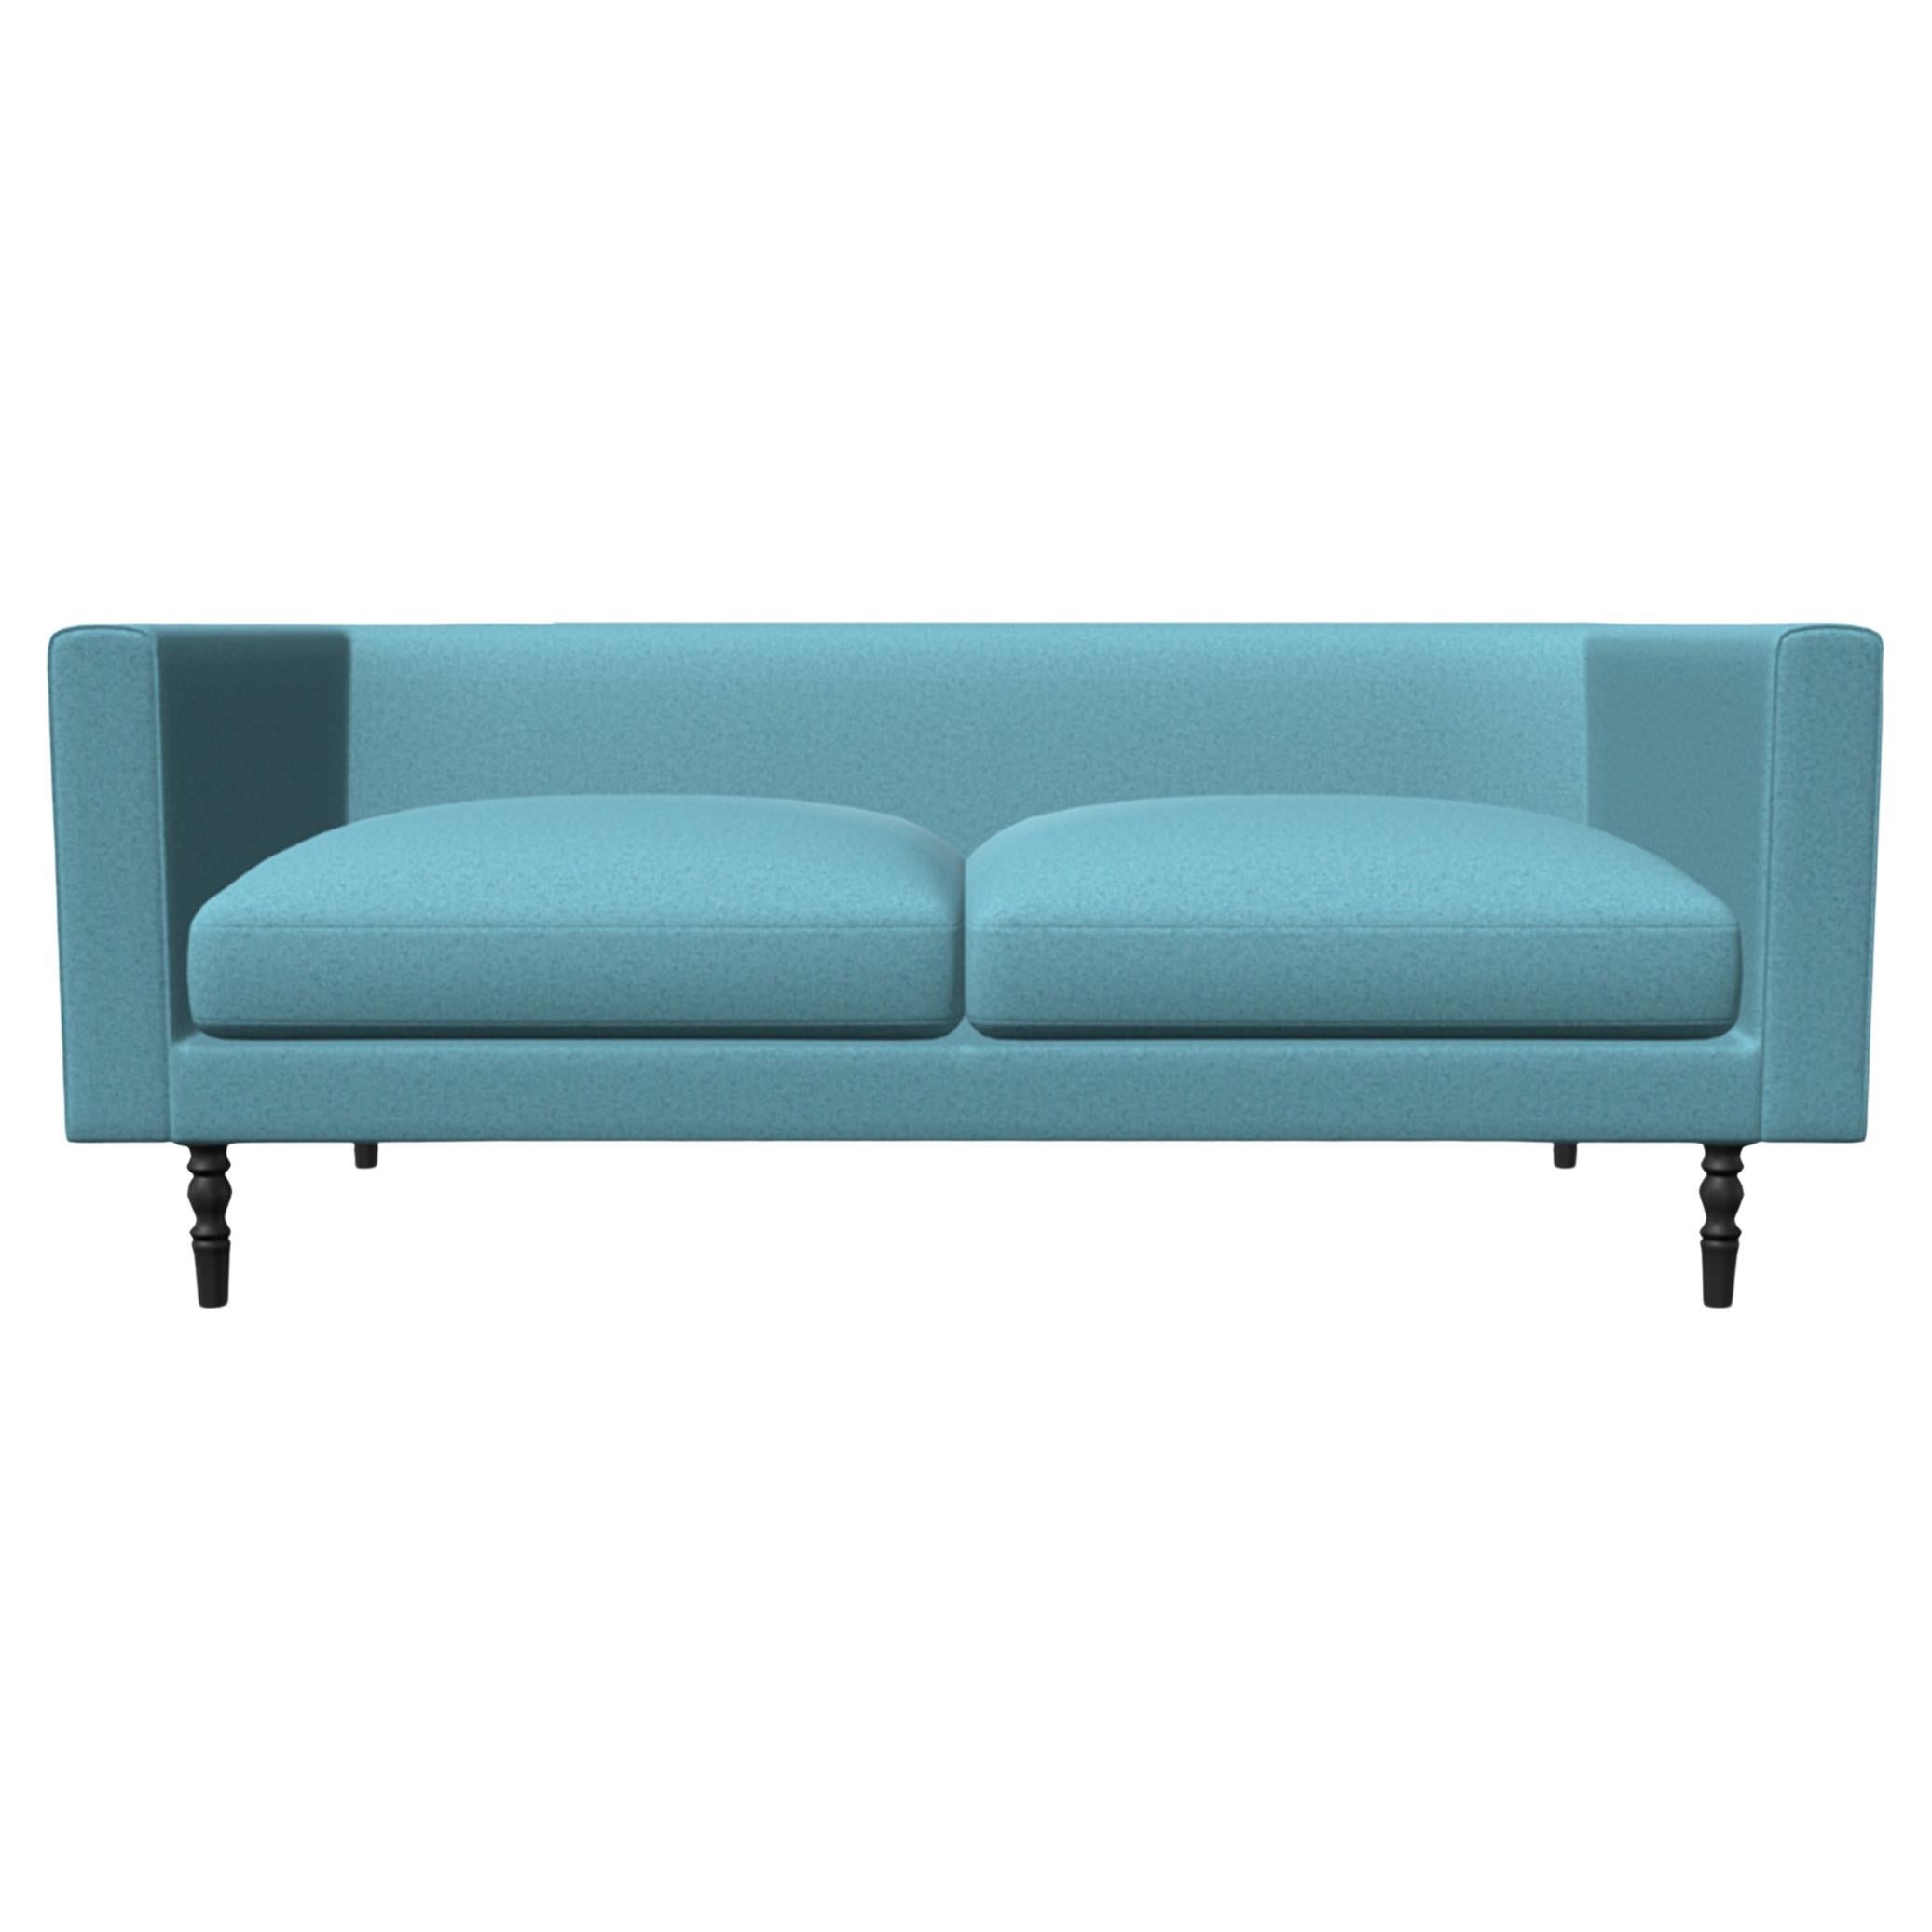 Moooi Boutique 2-Seat Sofa in Divina 3, 836 Upholstery with Pawn Legs For Sale